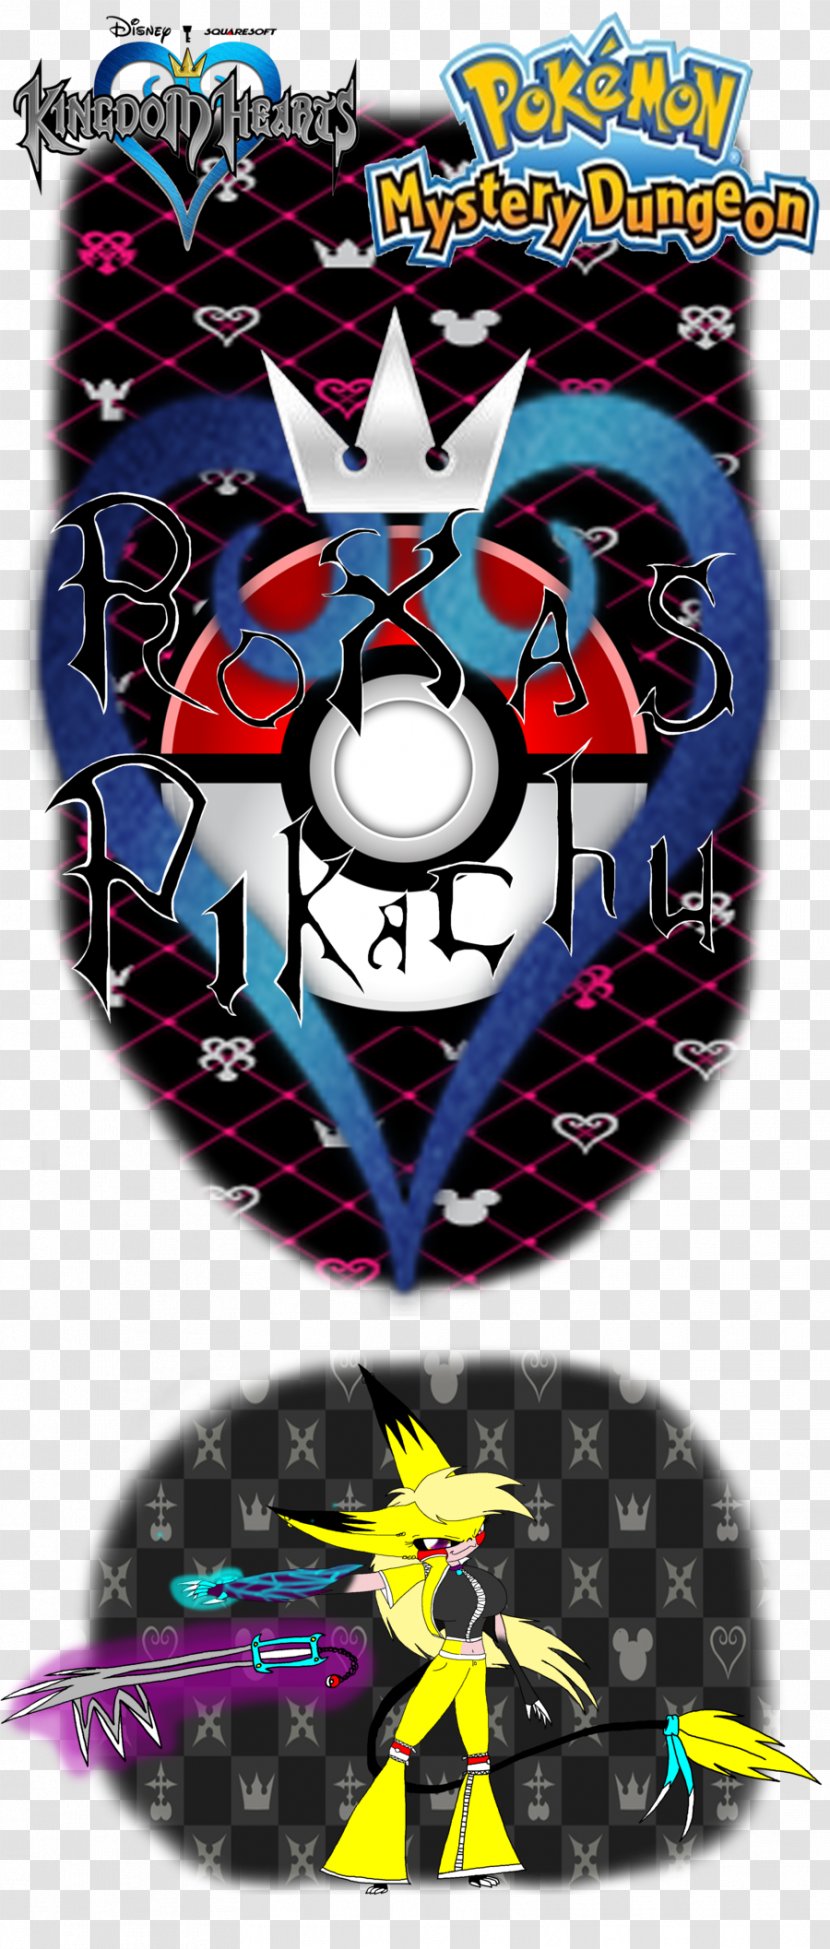 Pokémon Mystery Dungeon: Explorers Of Darkness/Time Nintendo DS Graphic Design - Pokemon Dungeon Transparent PNG